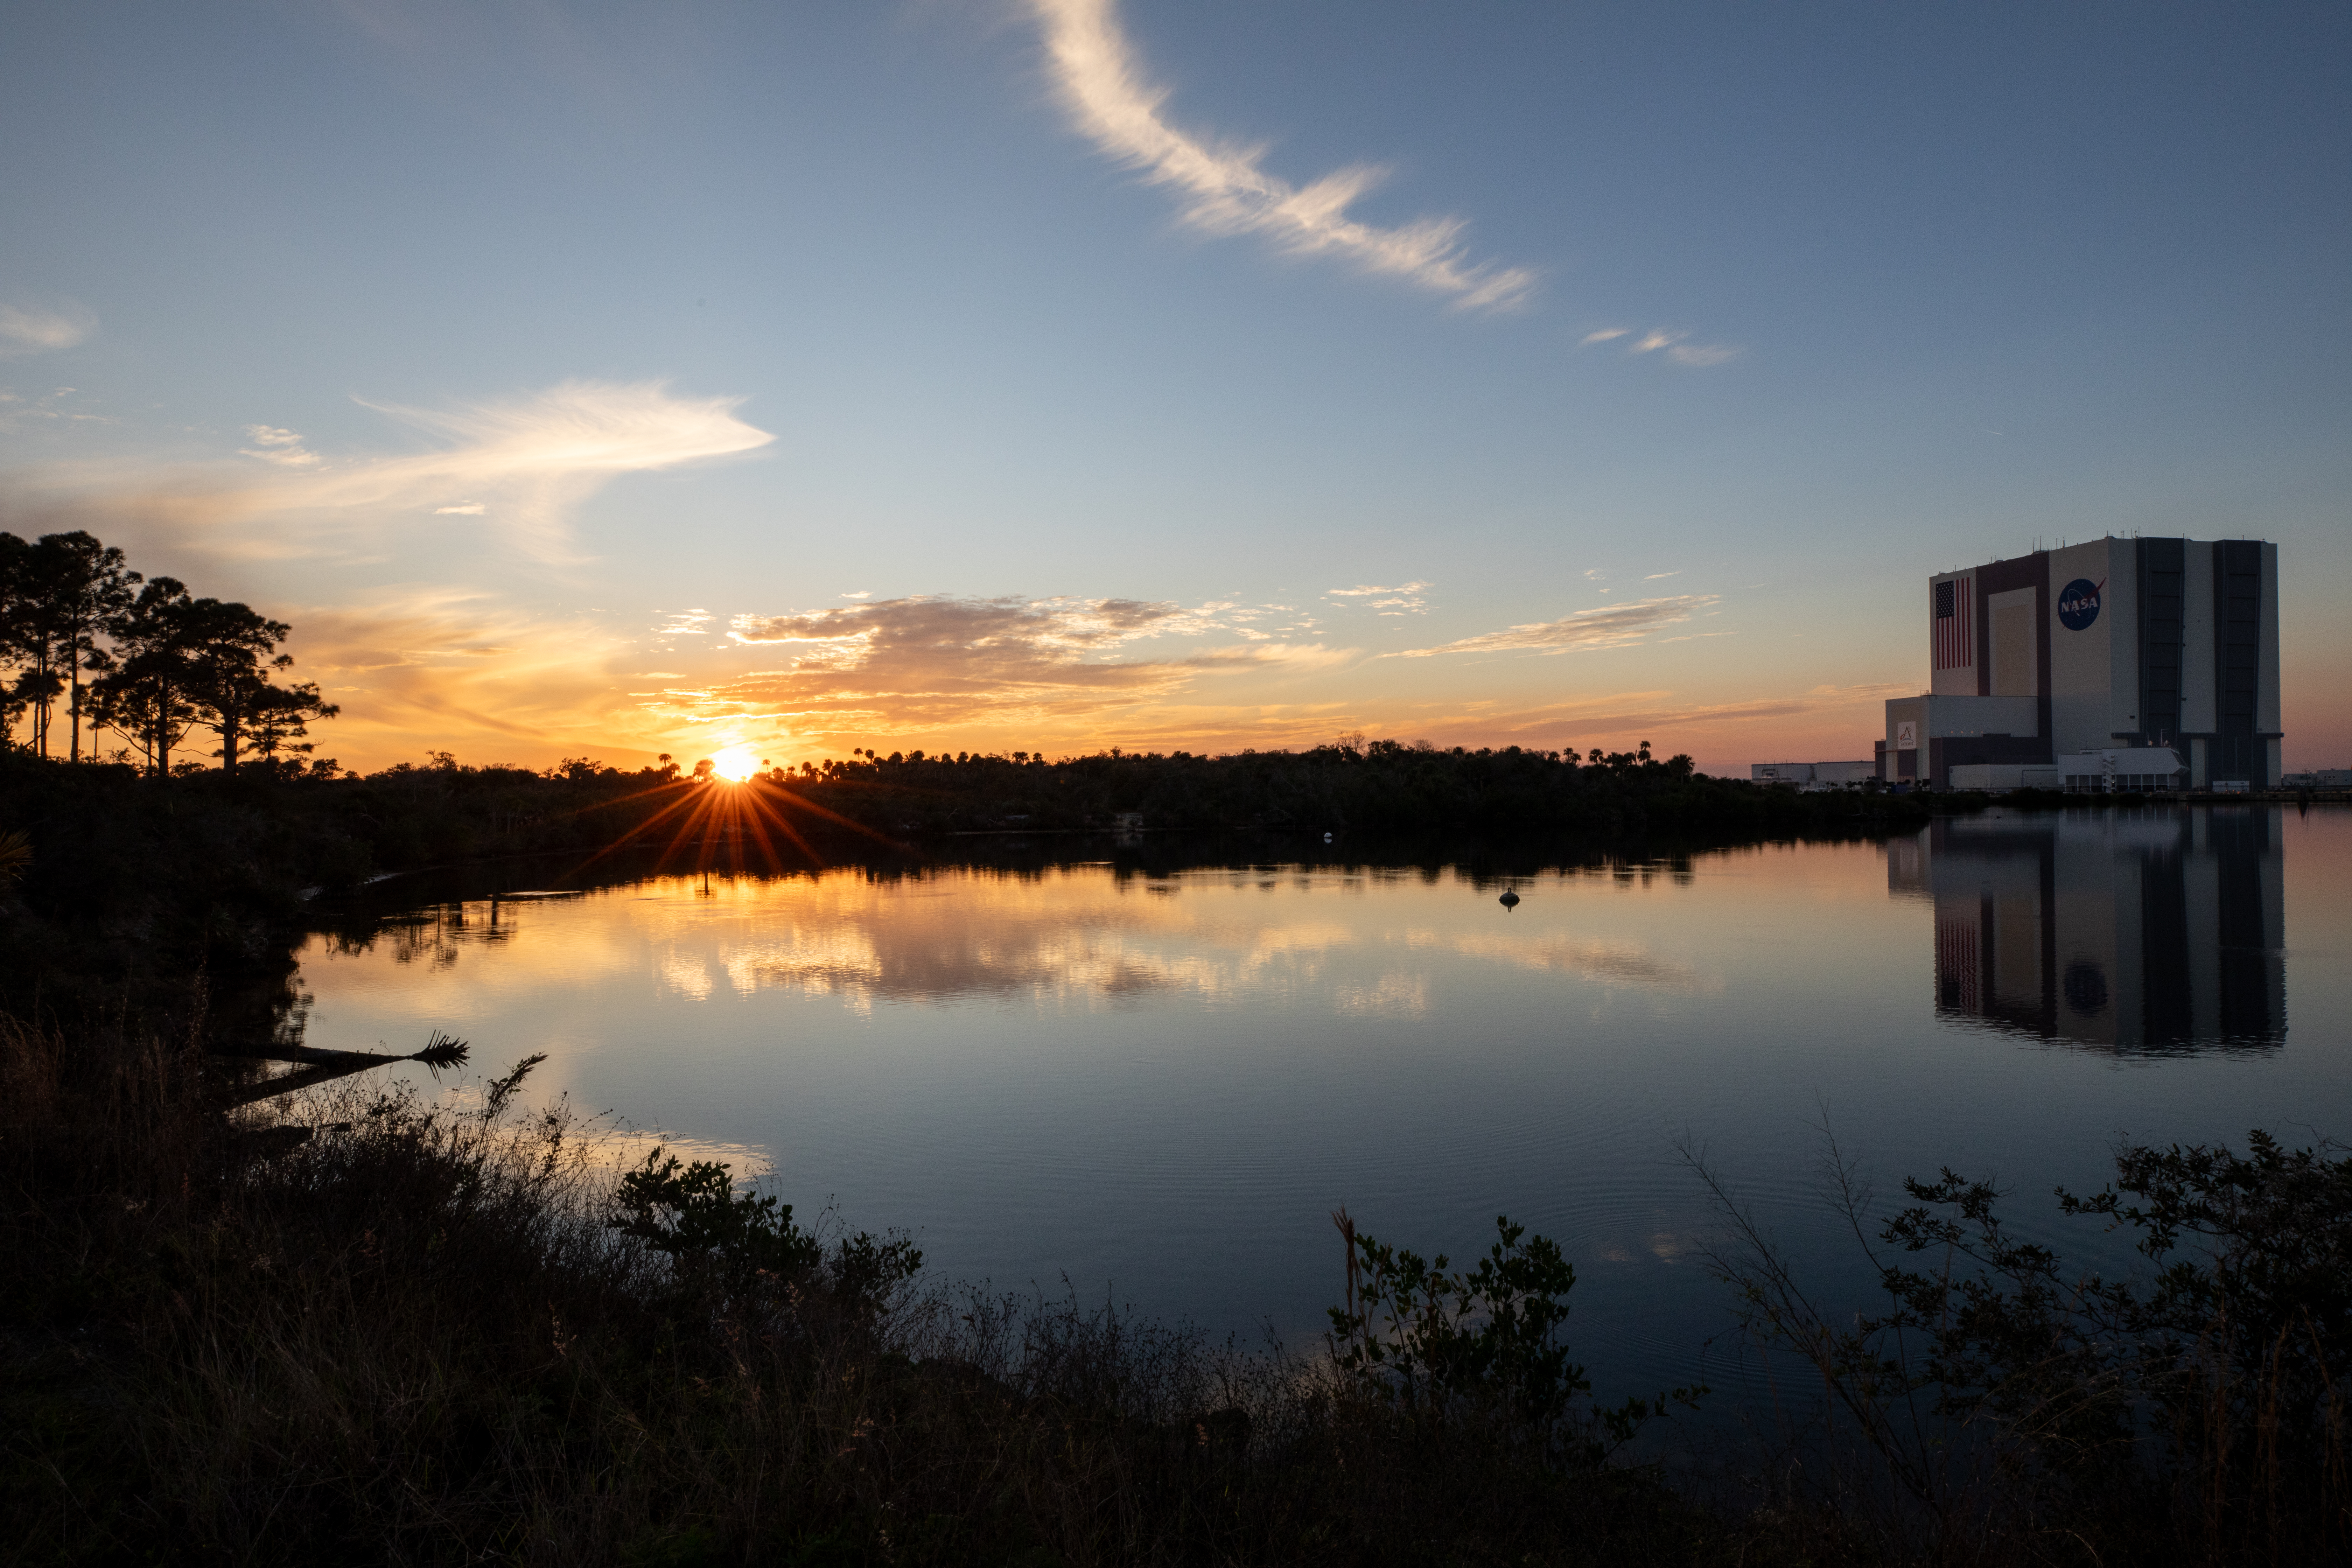 Slightly left of center, the Sun sets behind some vegetation. The sky is a dusty pale blue with a few clouds in it. Trees and plants arc around a body of water, and the Vehicle Assembly Building (VAB) stands at the right edge of the image. The VAB is a very tall, white and gray linear building with a United States flag and NASA meatball logo painted on the front.